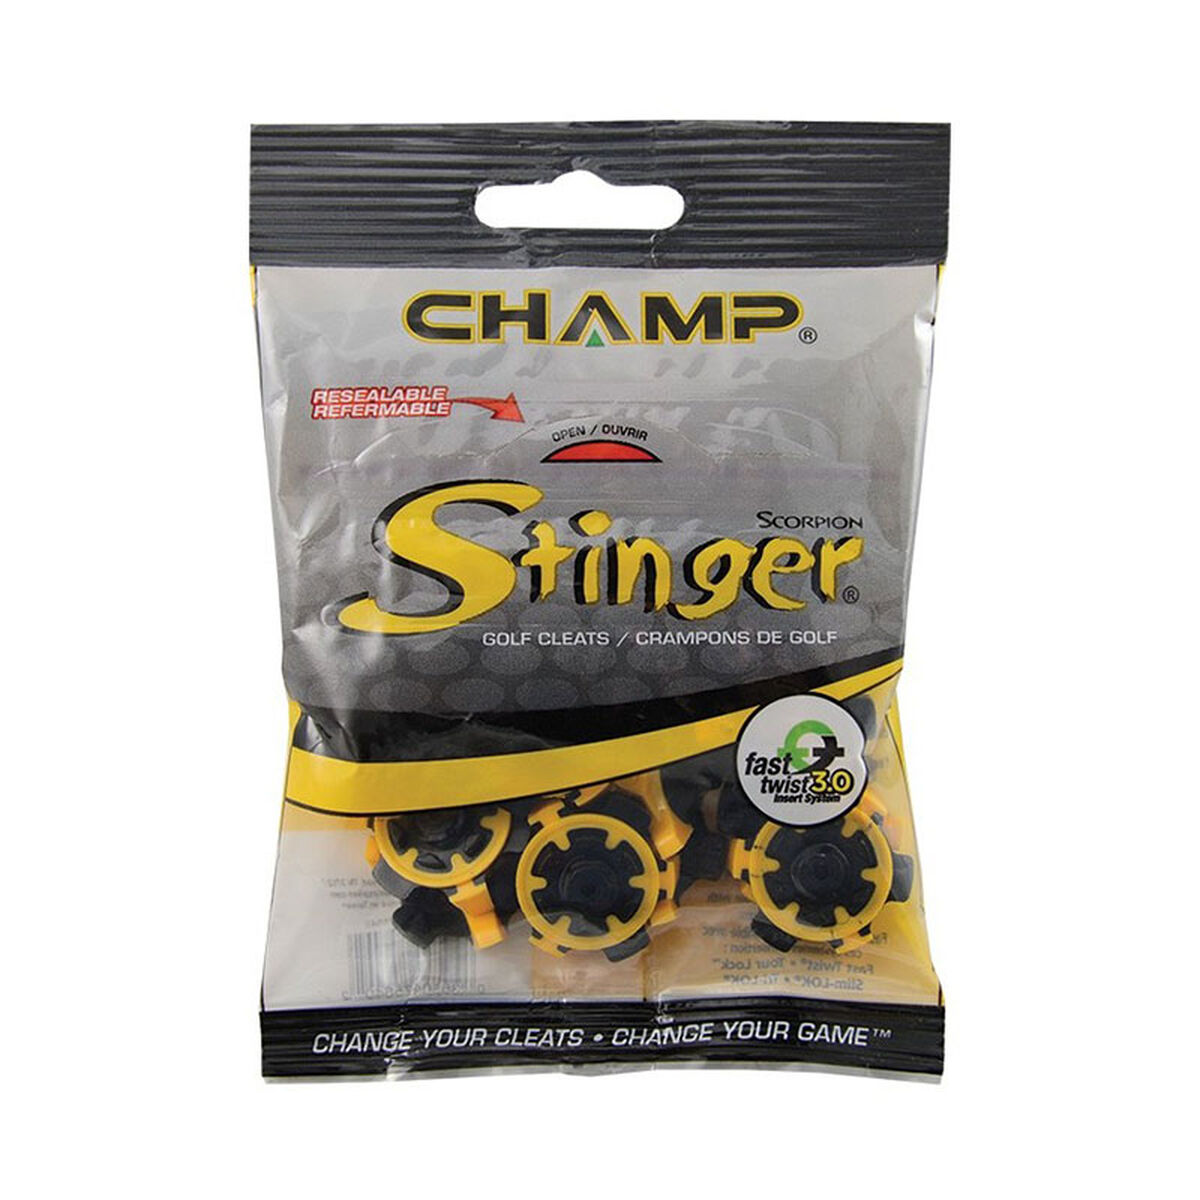 Champ Black and Yellow 18 Stinger Fast Twist 3 Spikes Golf Shoes, One size | American Golf